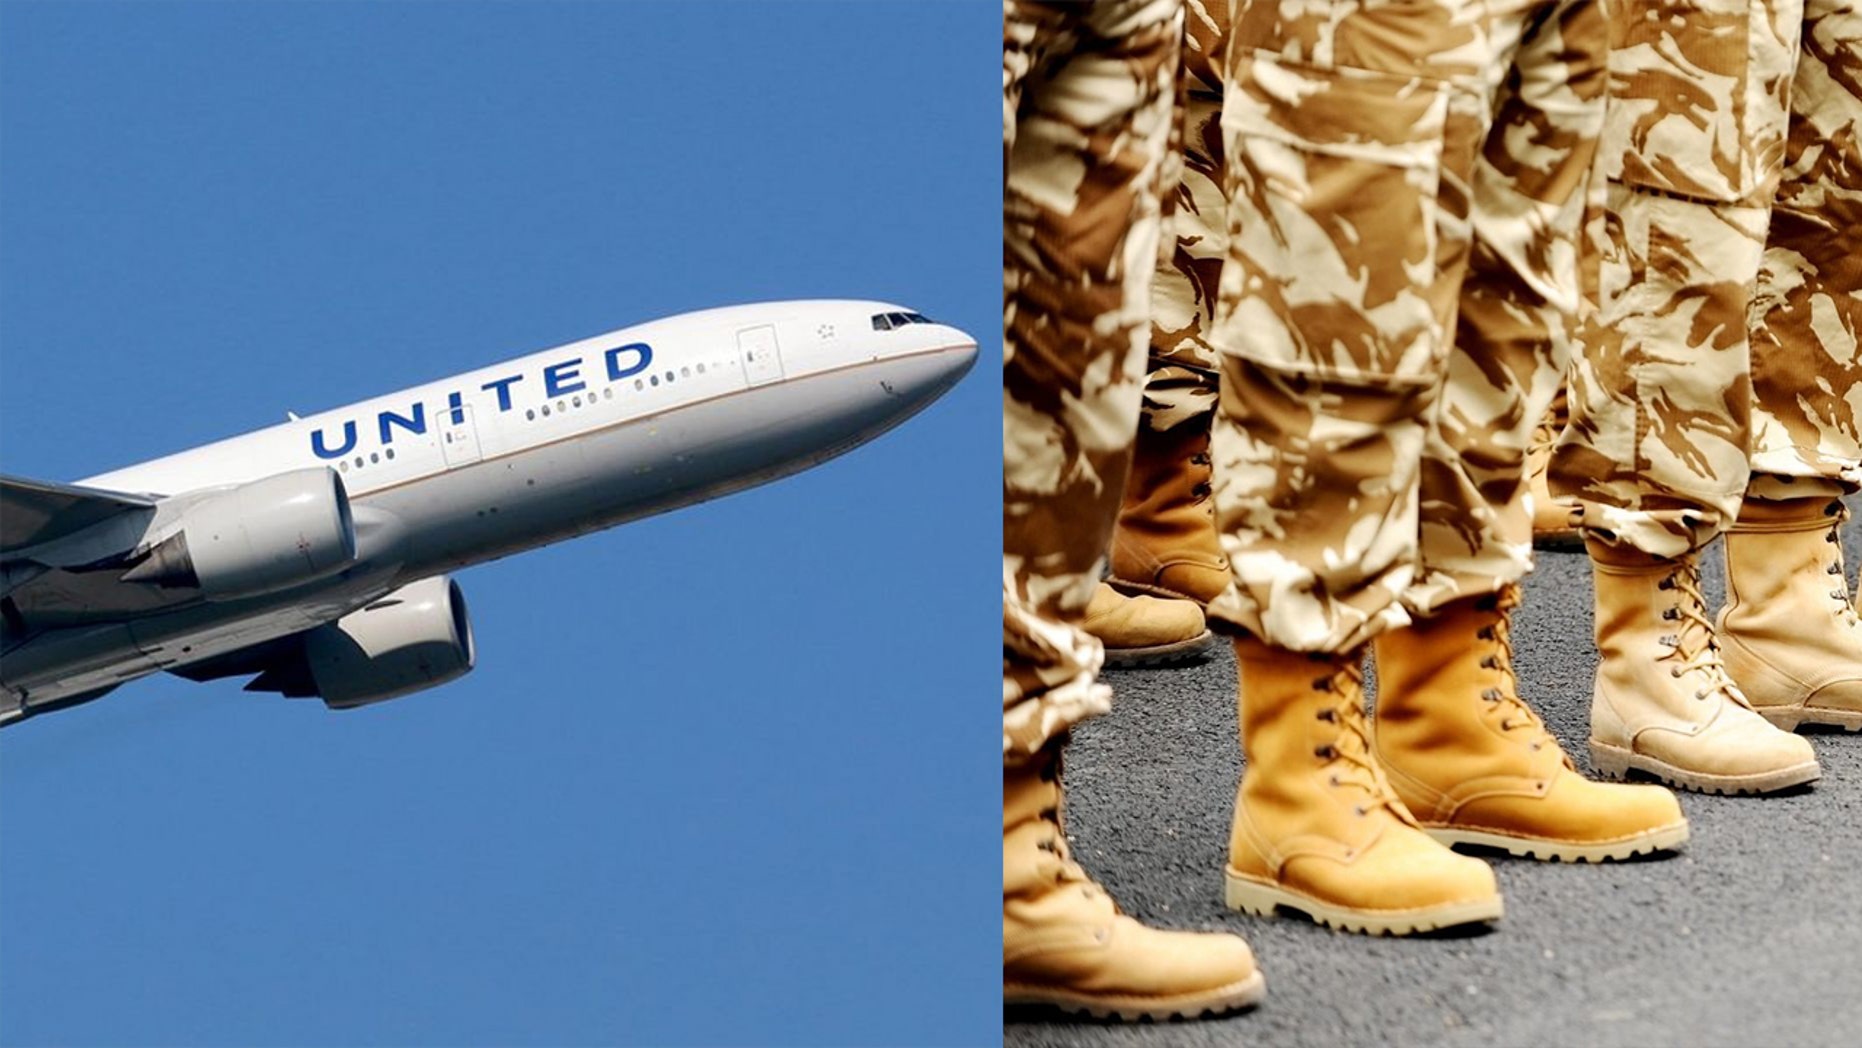 United Airlines refunds deployed soldier after canceled Christmas flight fiasco